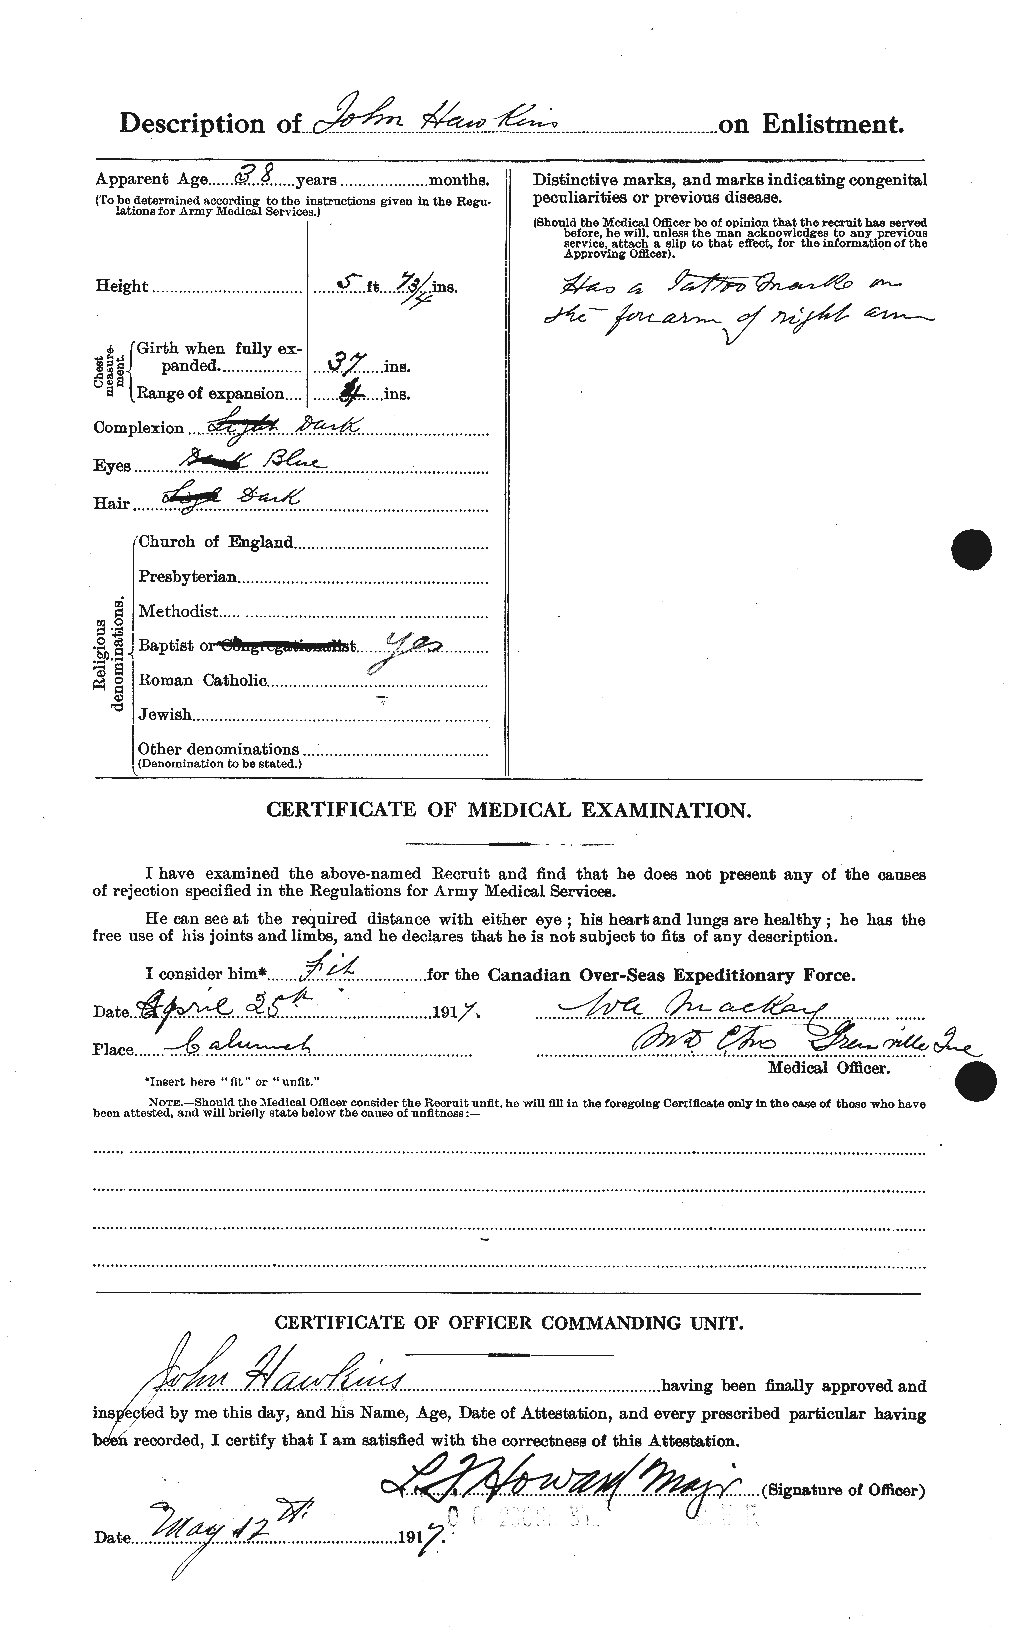 Personnel Records of the First World War - CEF 387194b